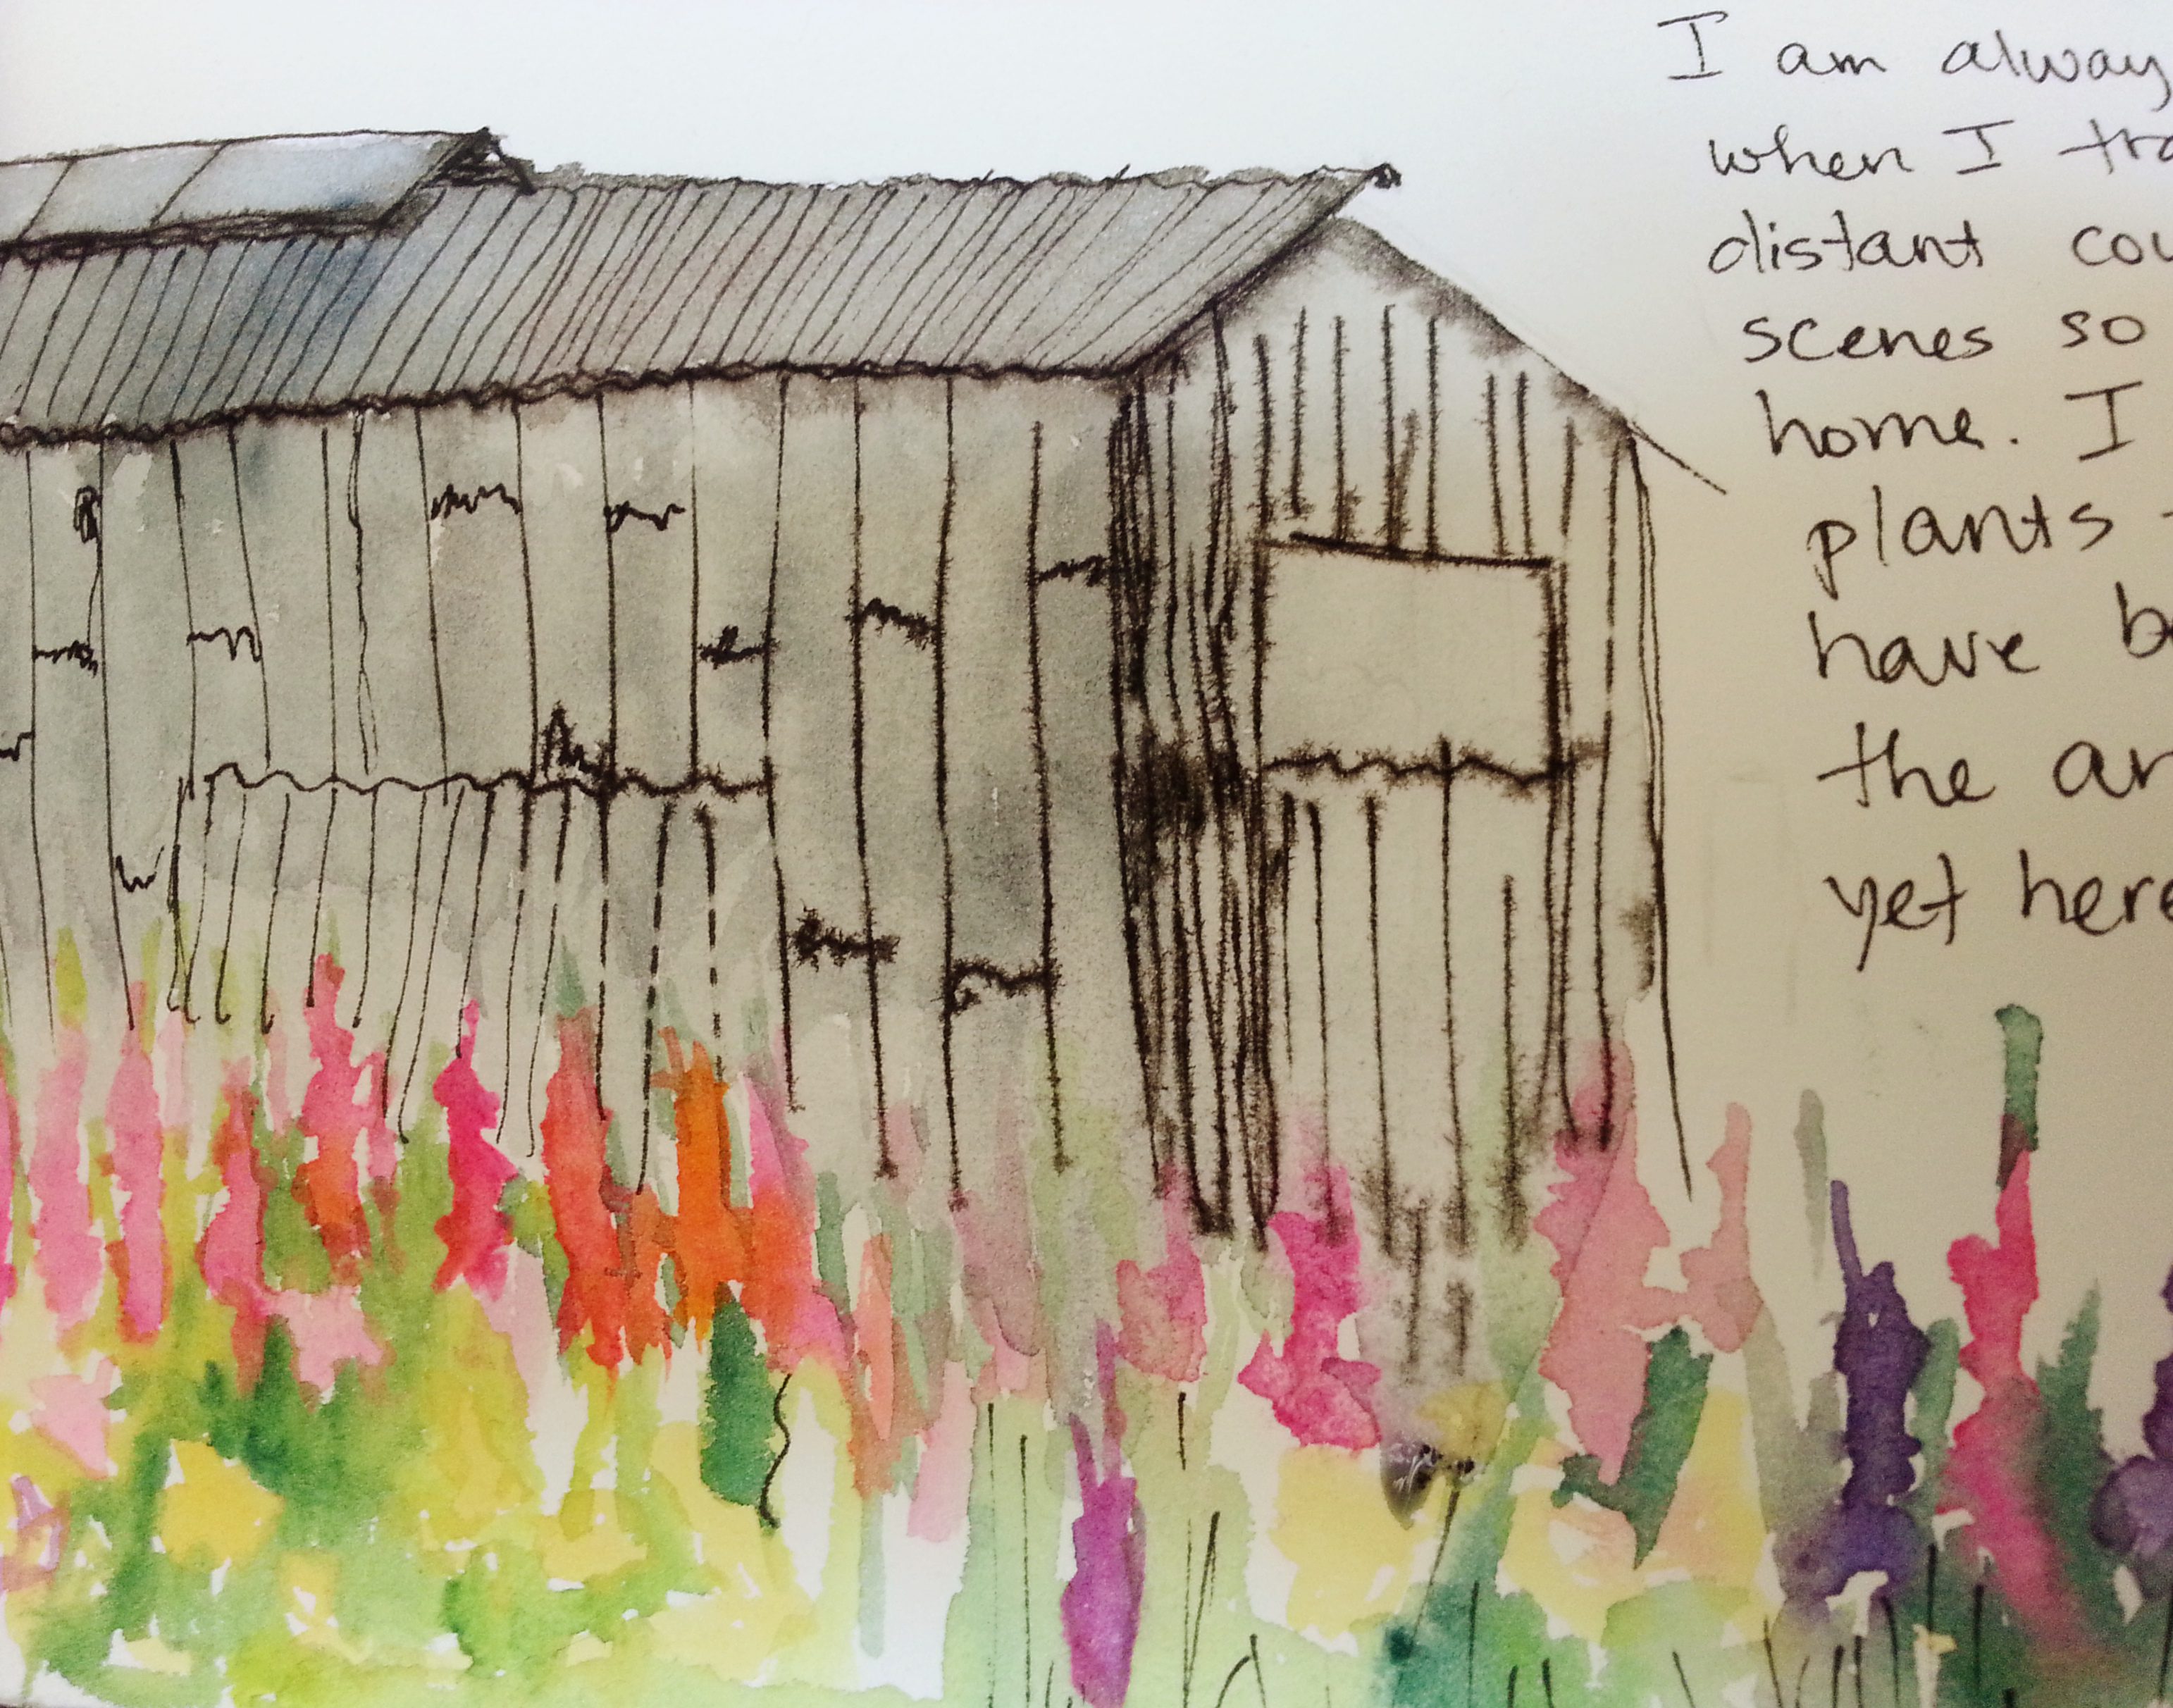 May 27, 2013 I am always surprised when I travel to a far, distant country and see scenes so familiar from home.  I expect the plants to be strange, have become used to the ancient architecture, yet here is a field of hollyhocks underlining an ordinary barn of wood and corrugated tin.